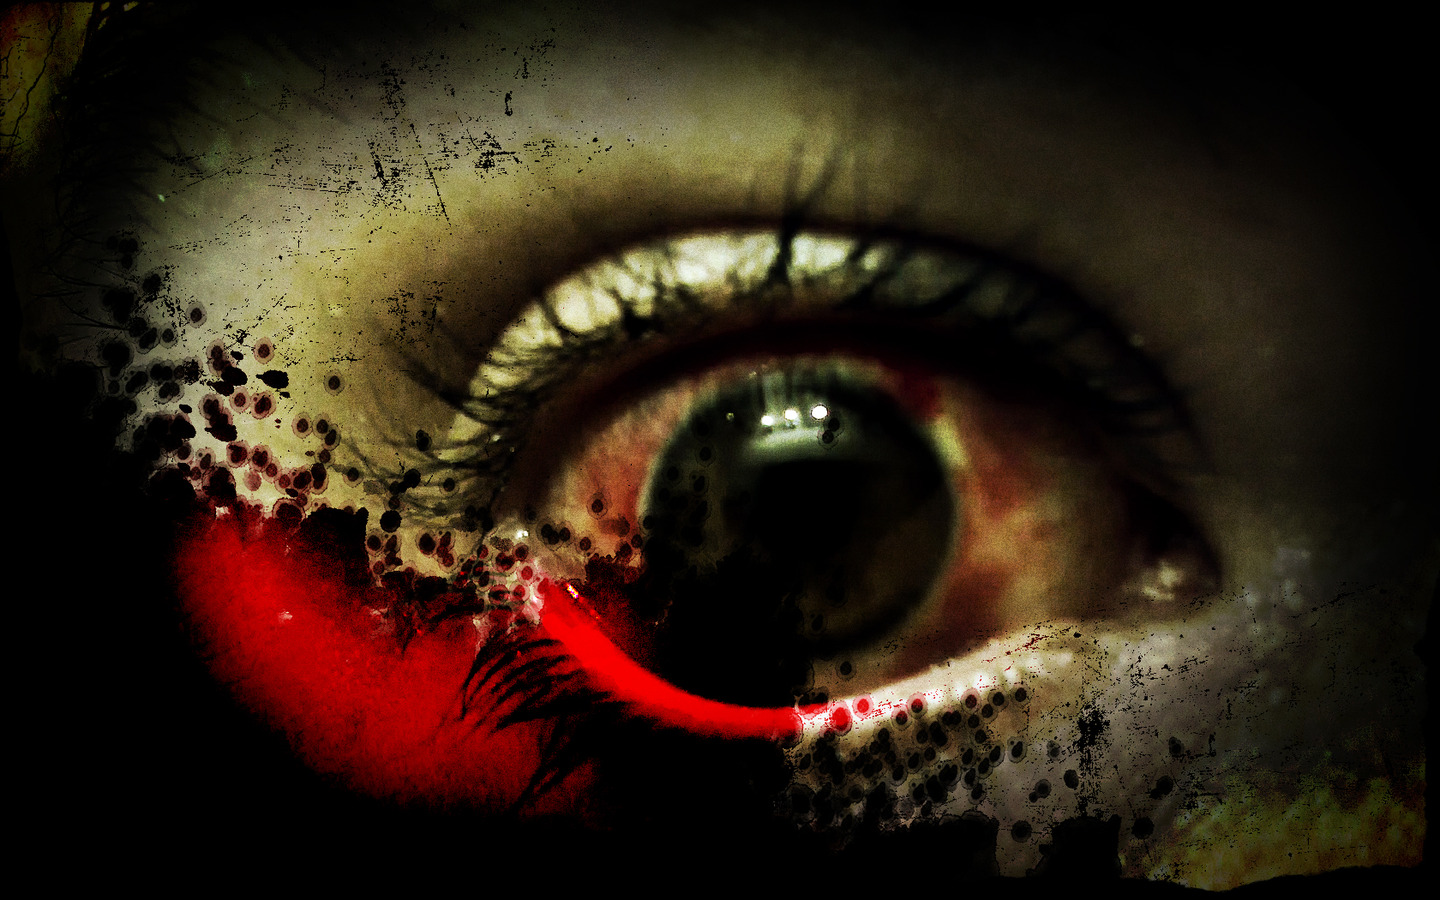 Scary Eyes Wallpapers